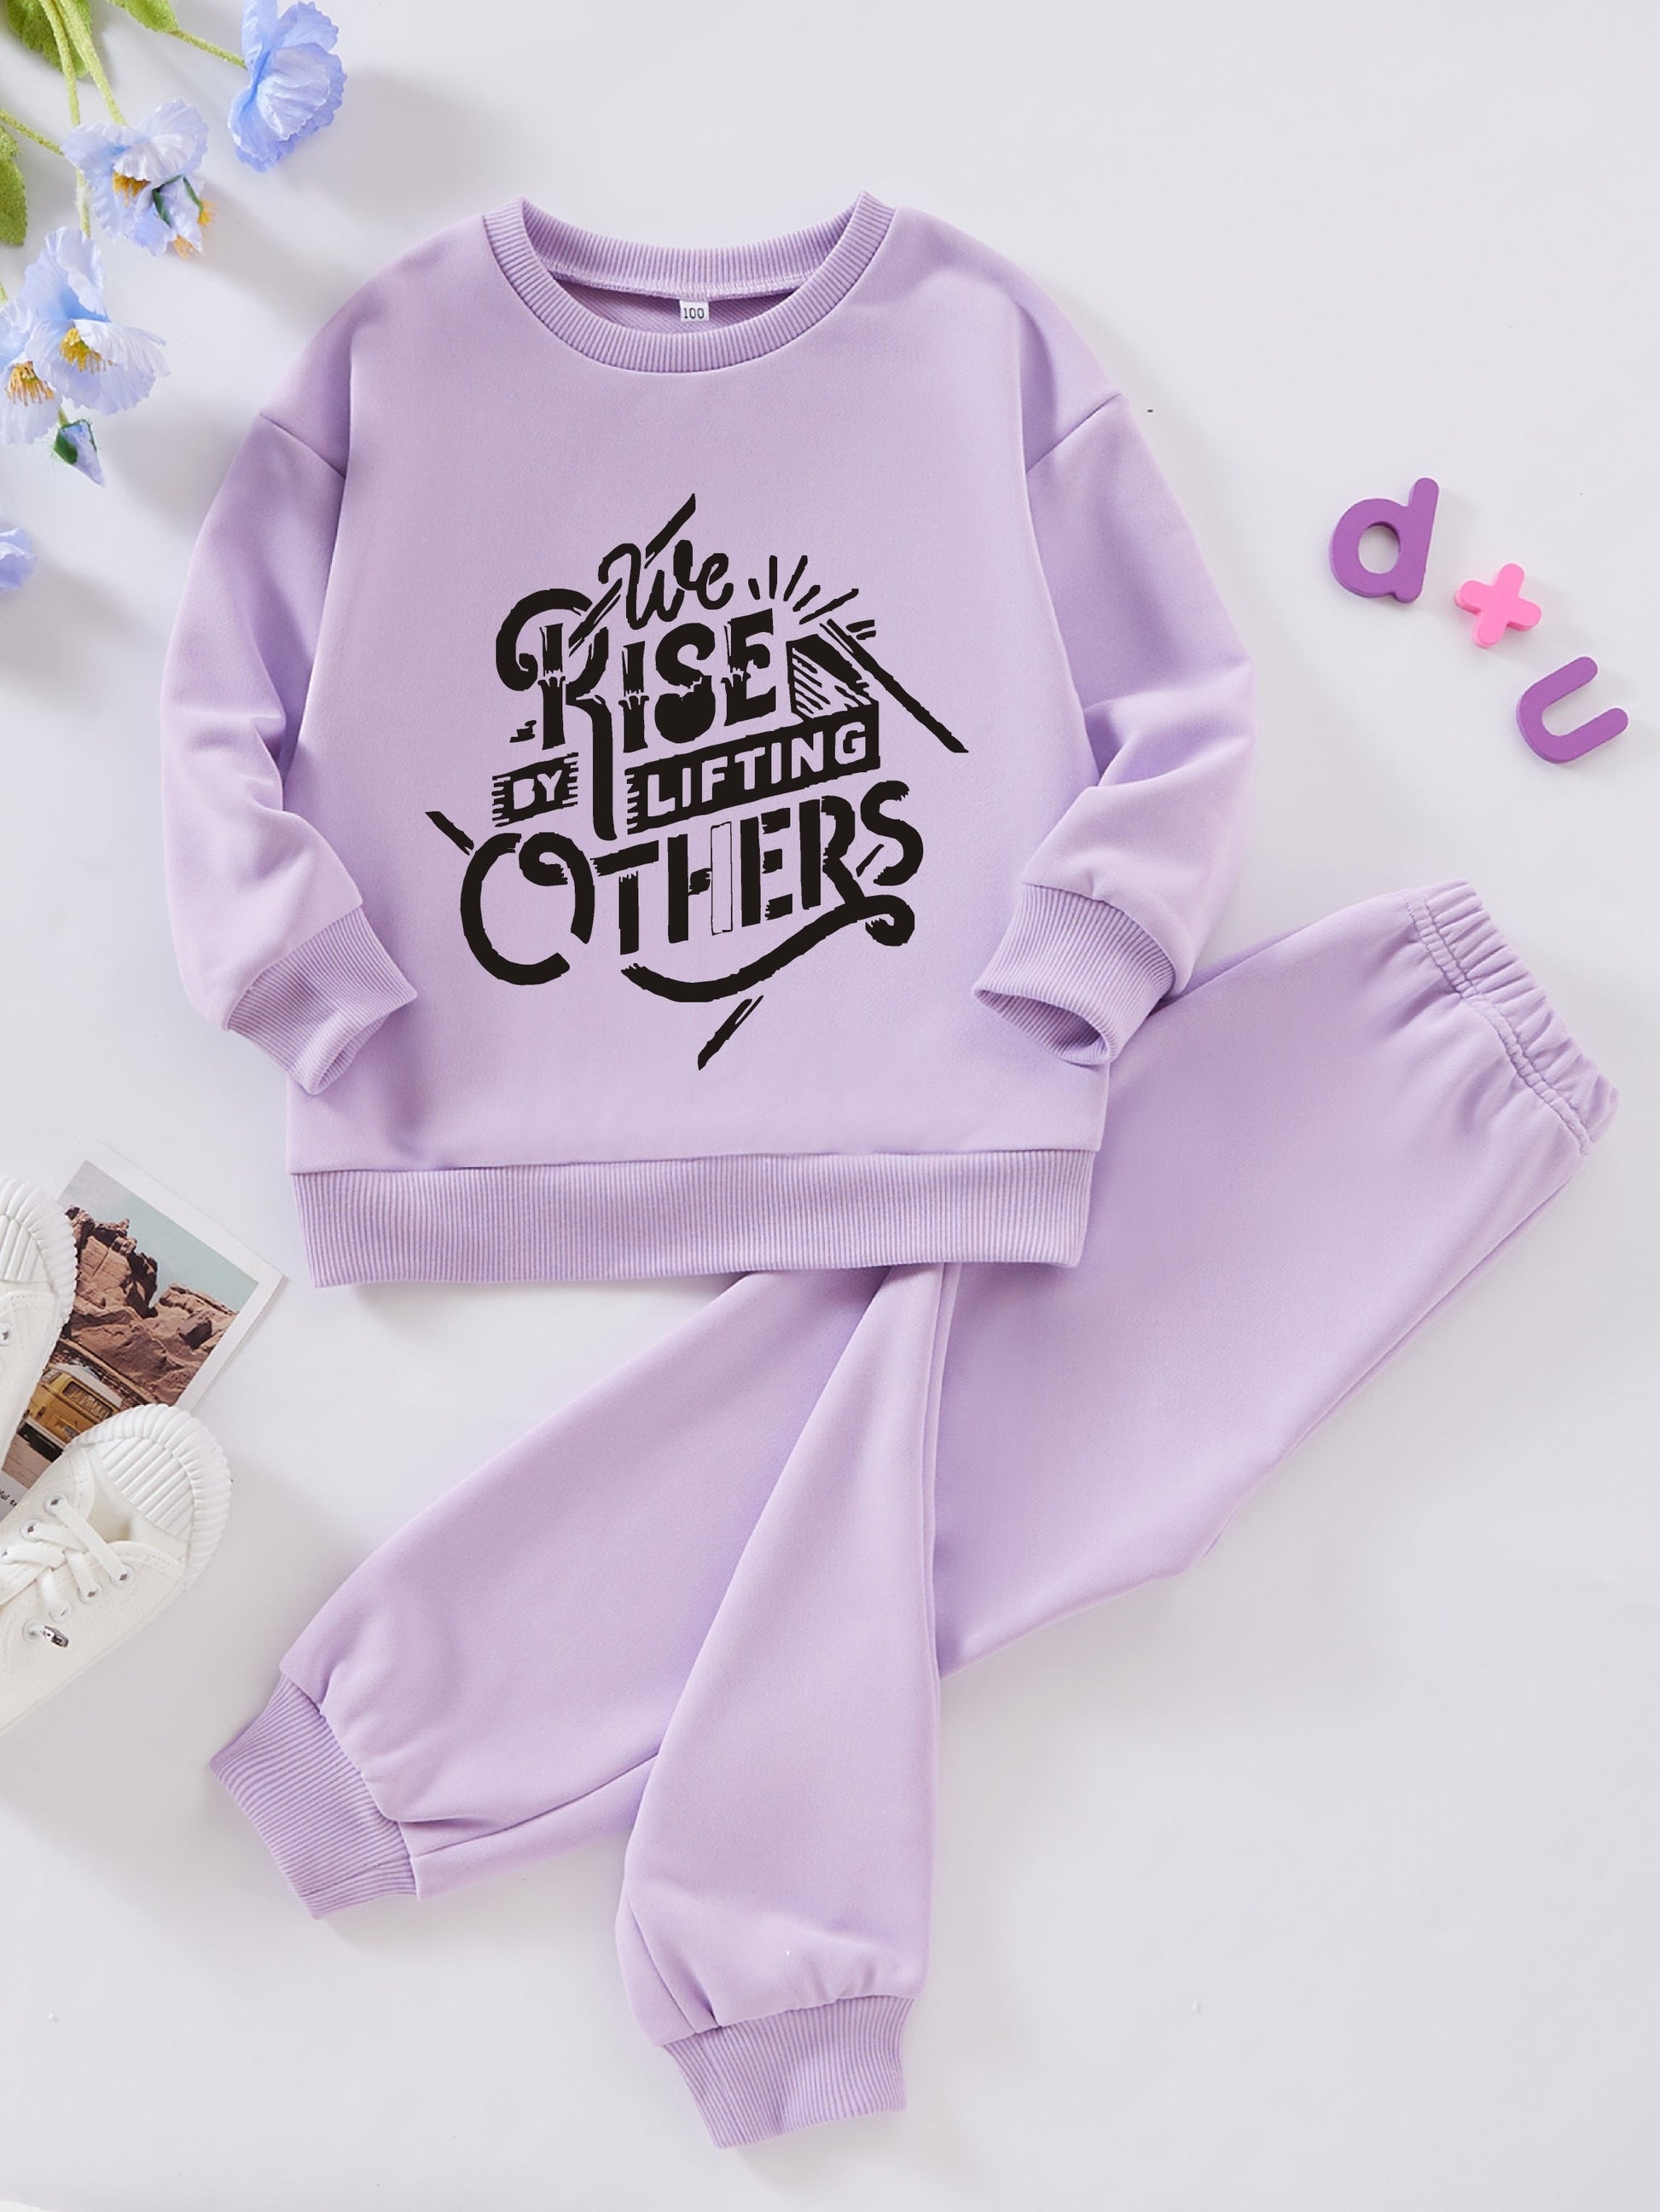 We Rise By Lifting Others Youth Christian Casual Outfit claimedbygoddesigns